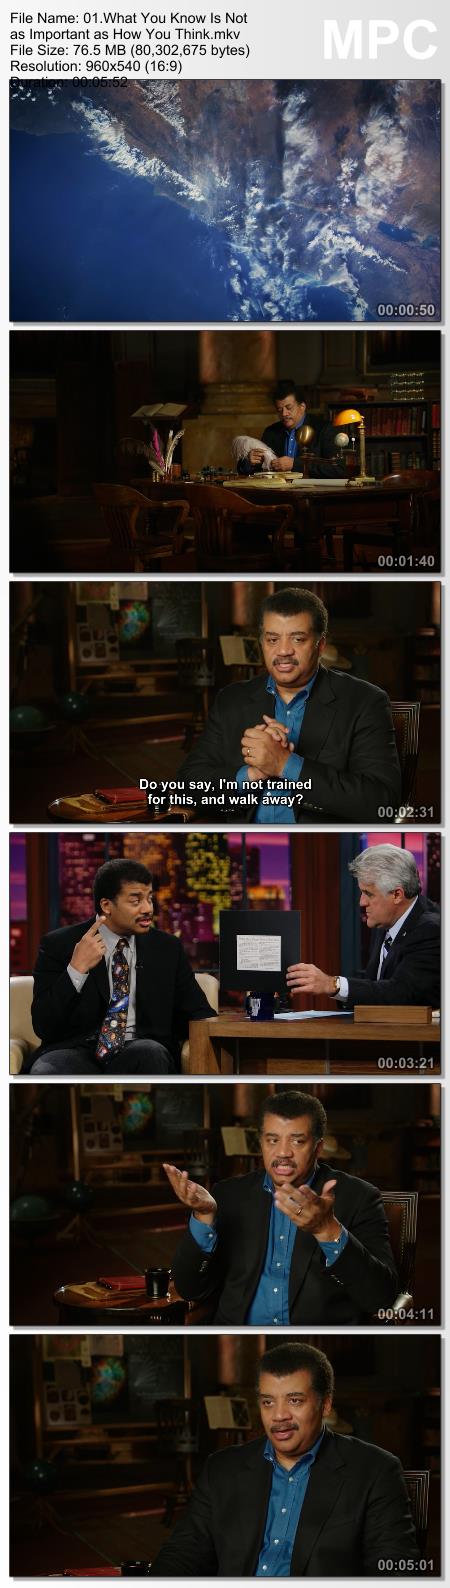 Neil deGrasse Tyson Teaches Scientific Thinking and Communication